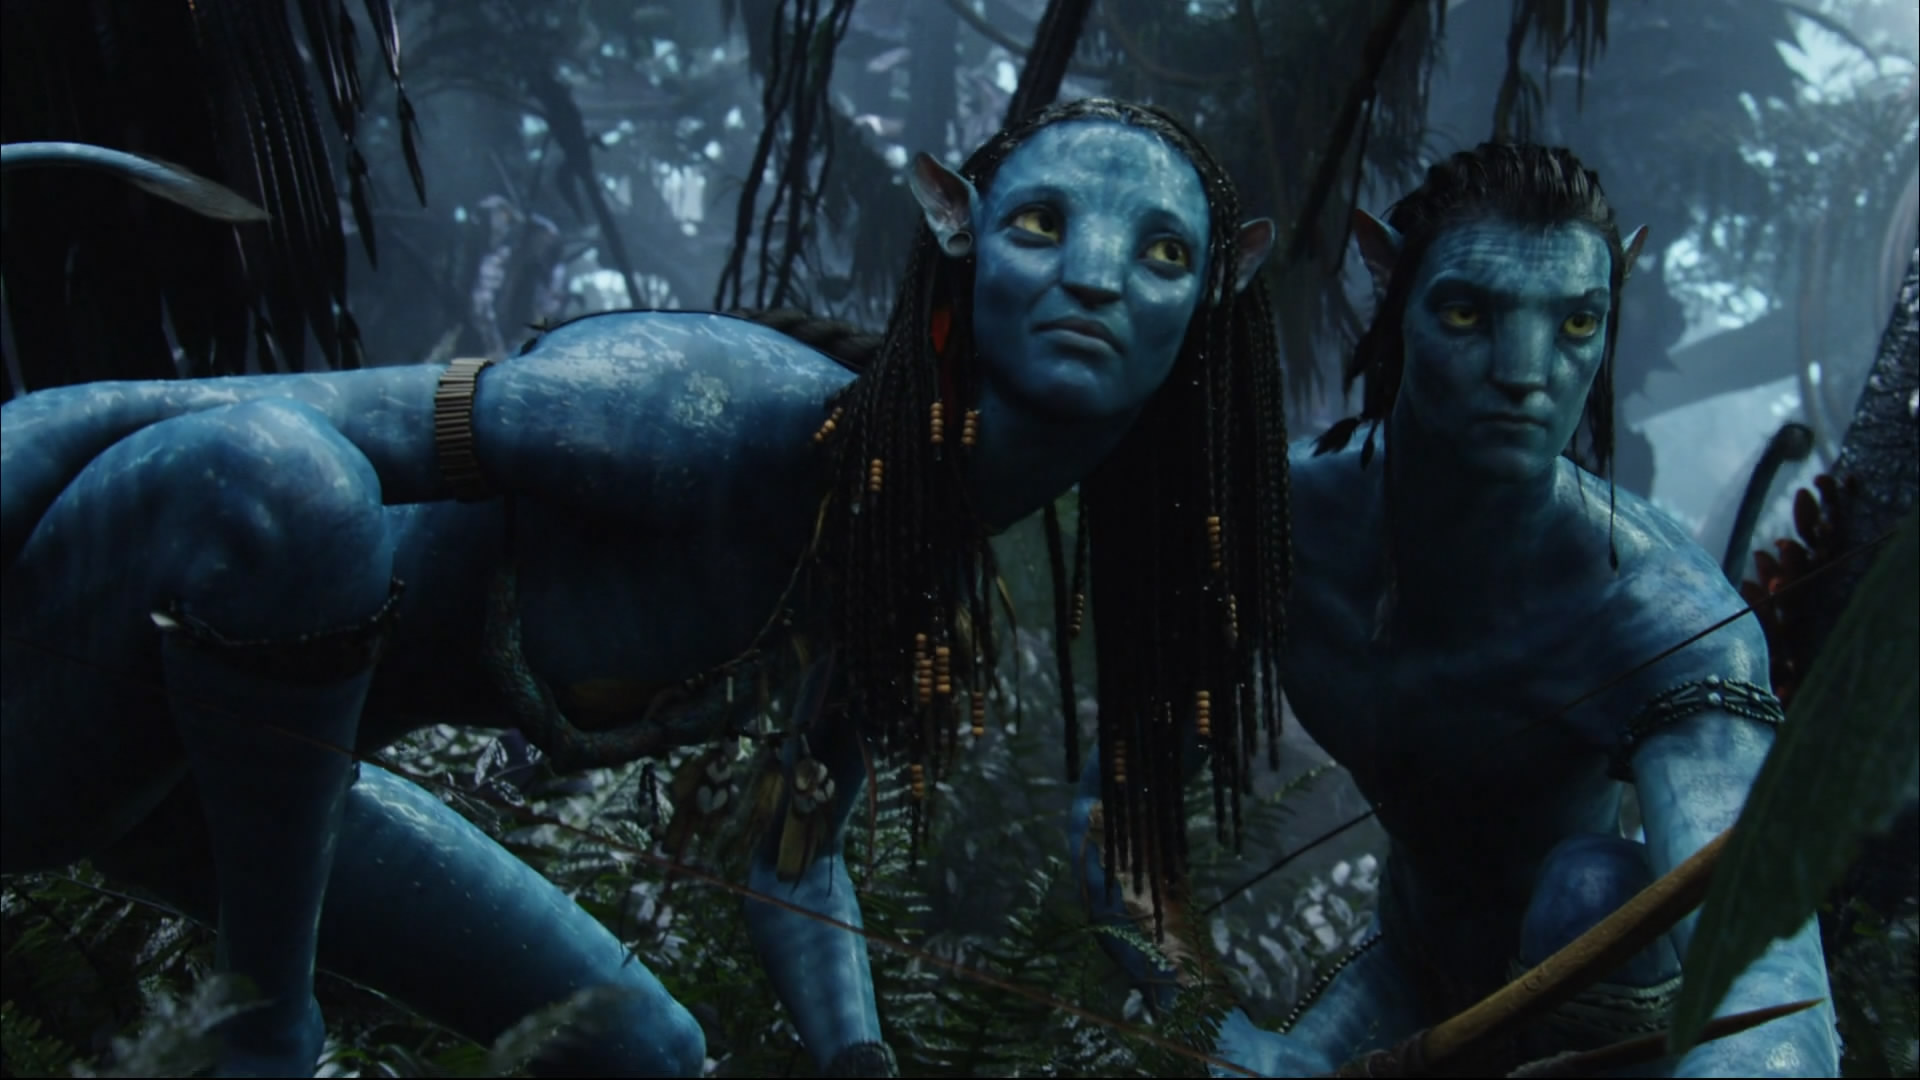 Avatar characters Neytiri and Jake Sully with long hair, yellow eyes, and weapons, in a natural setting.